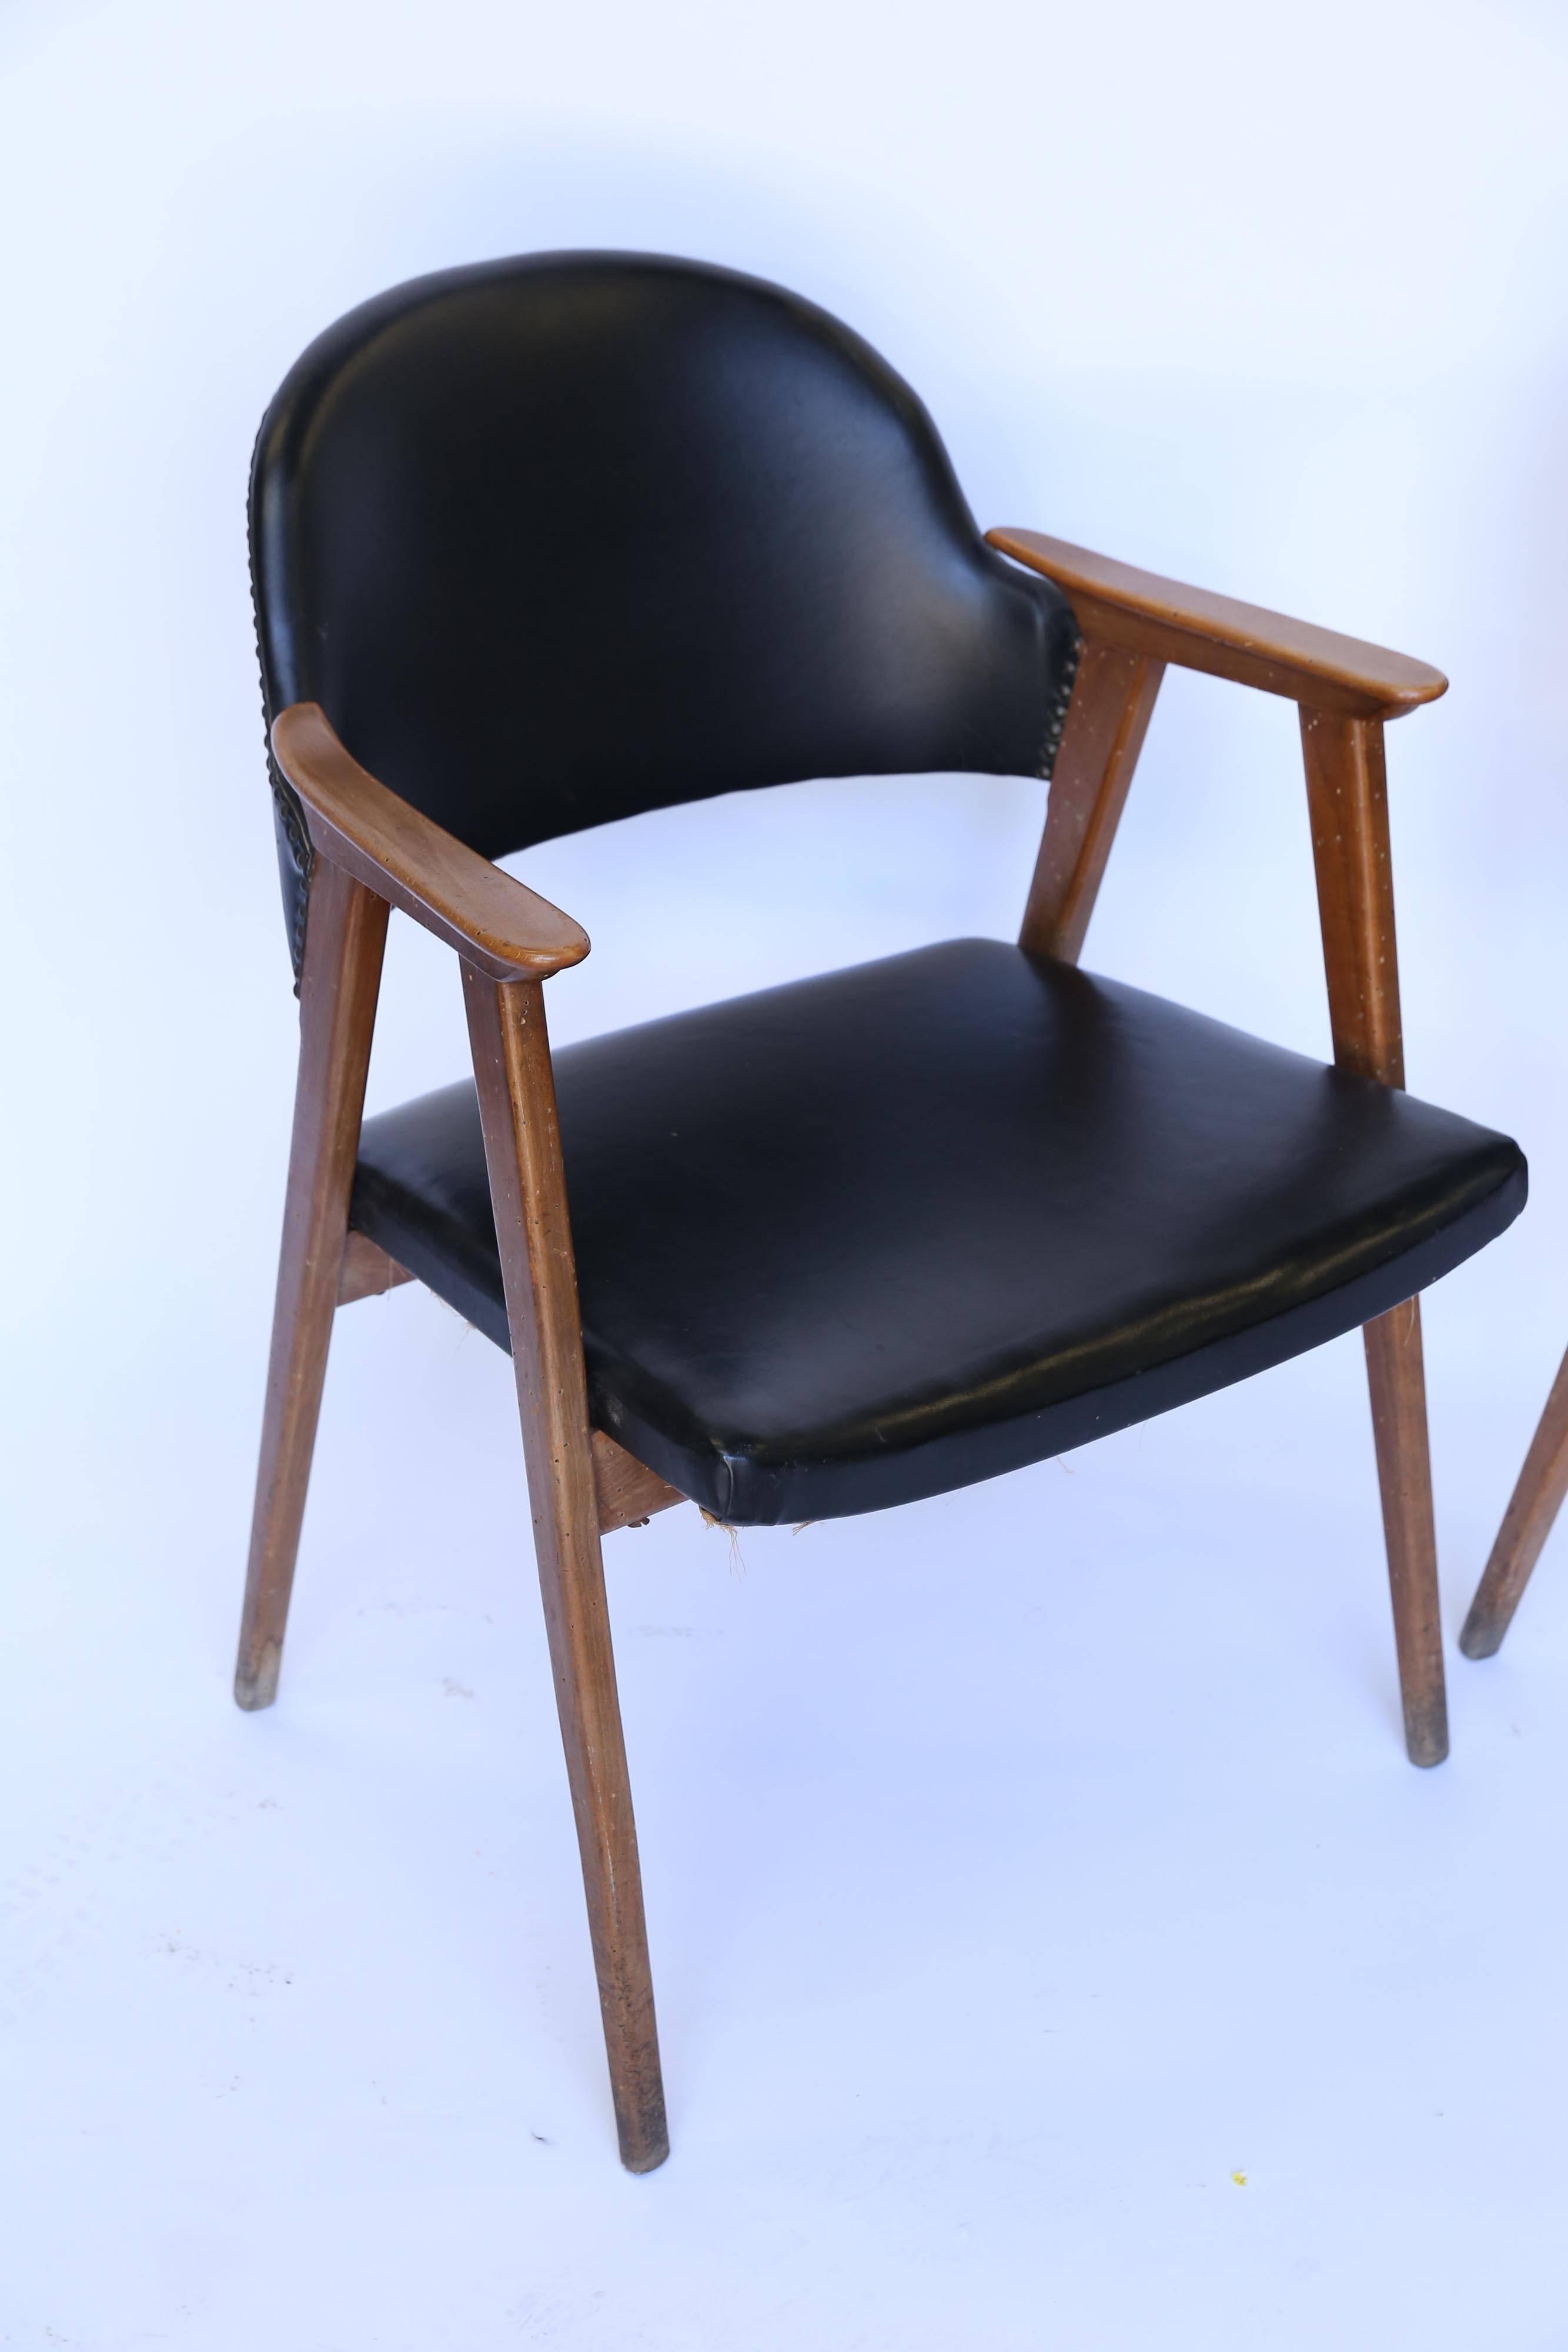 A handsome pair of midcentury armchairs from France. In black leather with brass nail head detailing on the back and a sculptural form. While the leather is in near perfect condition, the wood has experienced a minor worm infestation which is no